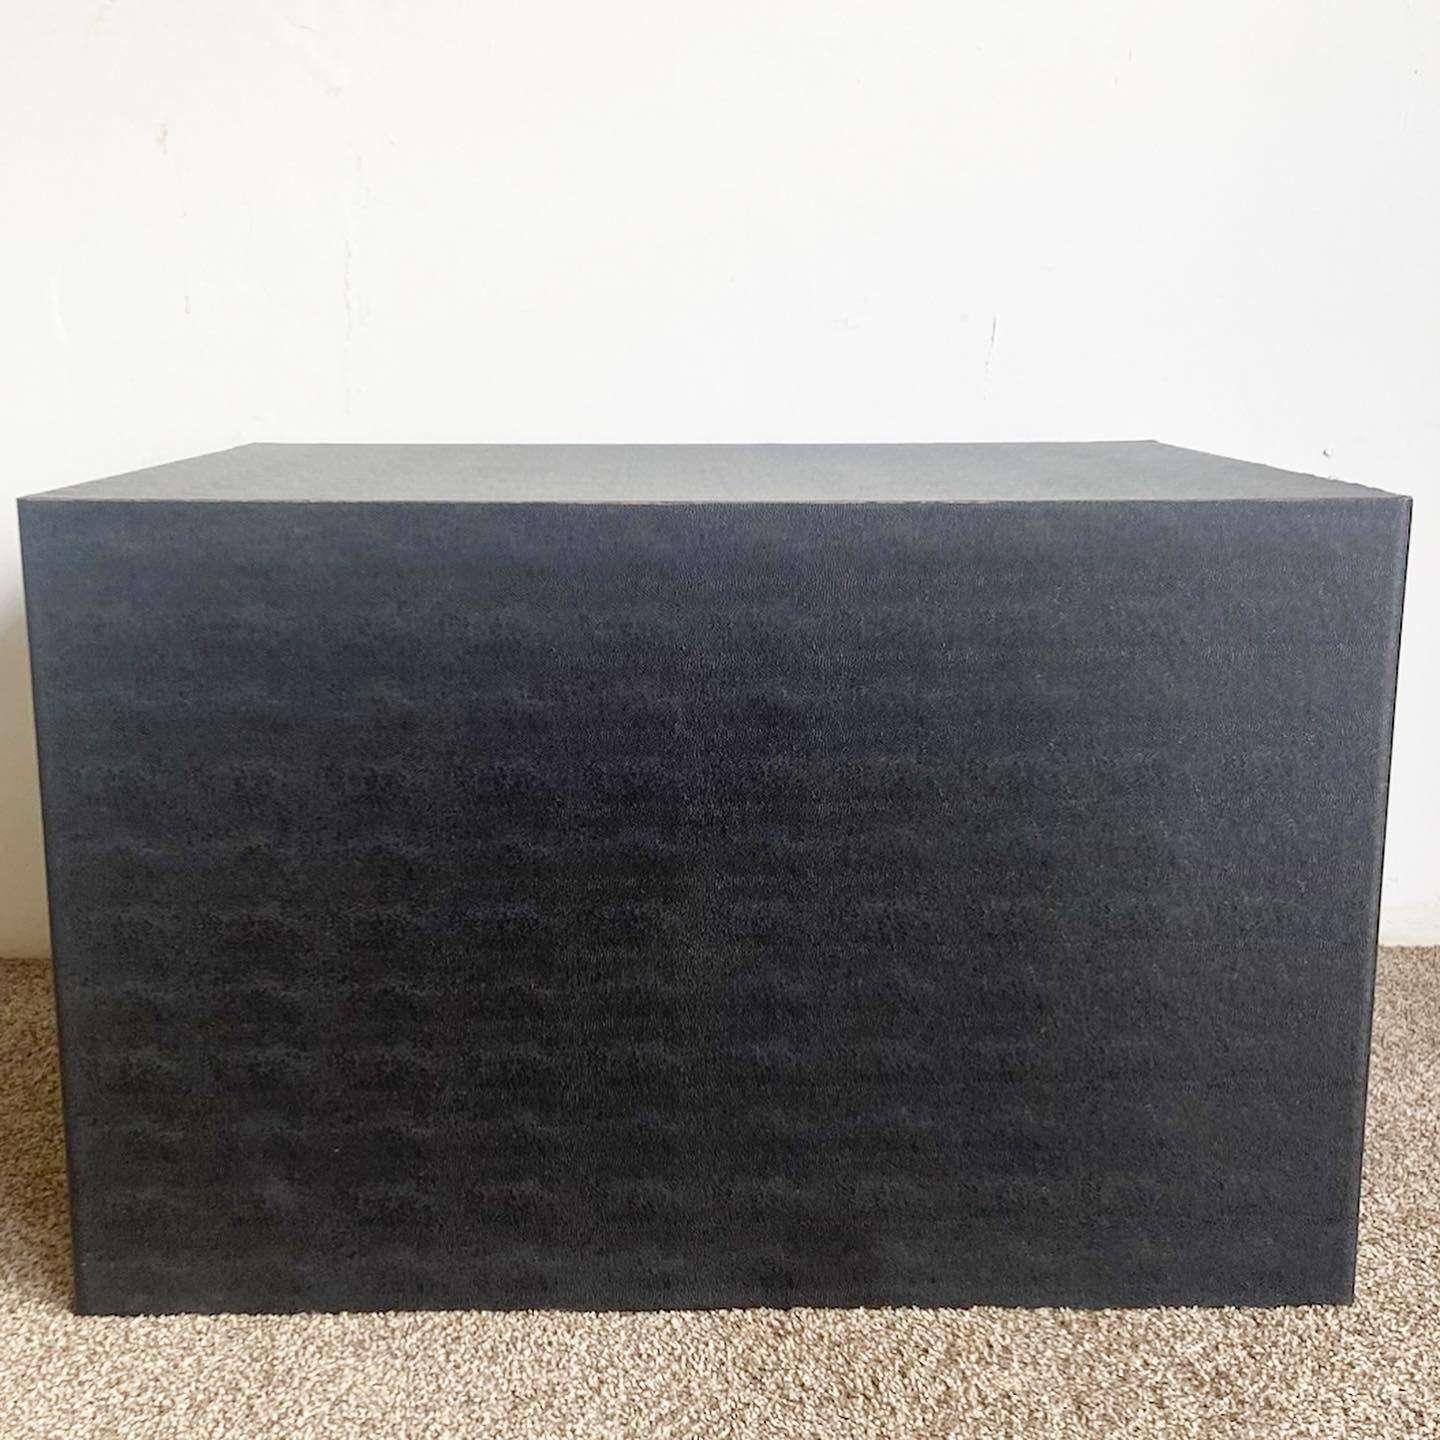 Exceptional vintage postmodern oversized cubic table. Features a black faux snake skin.
